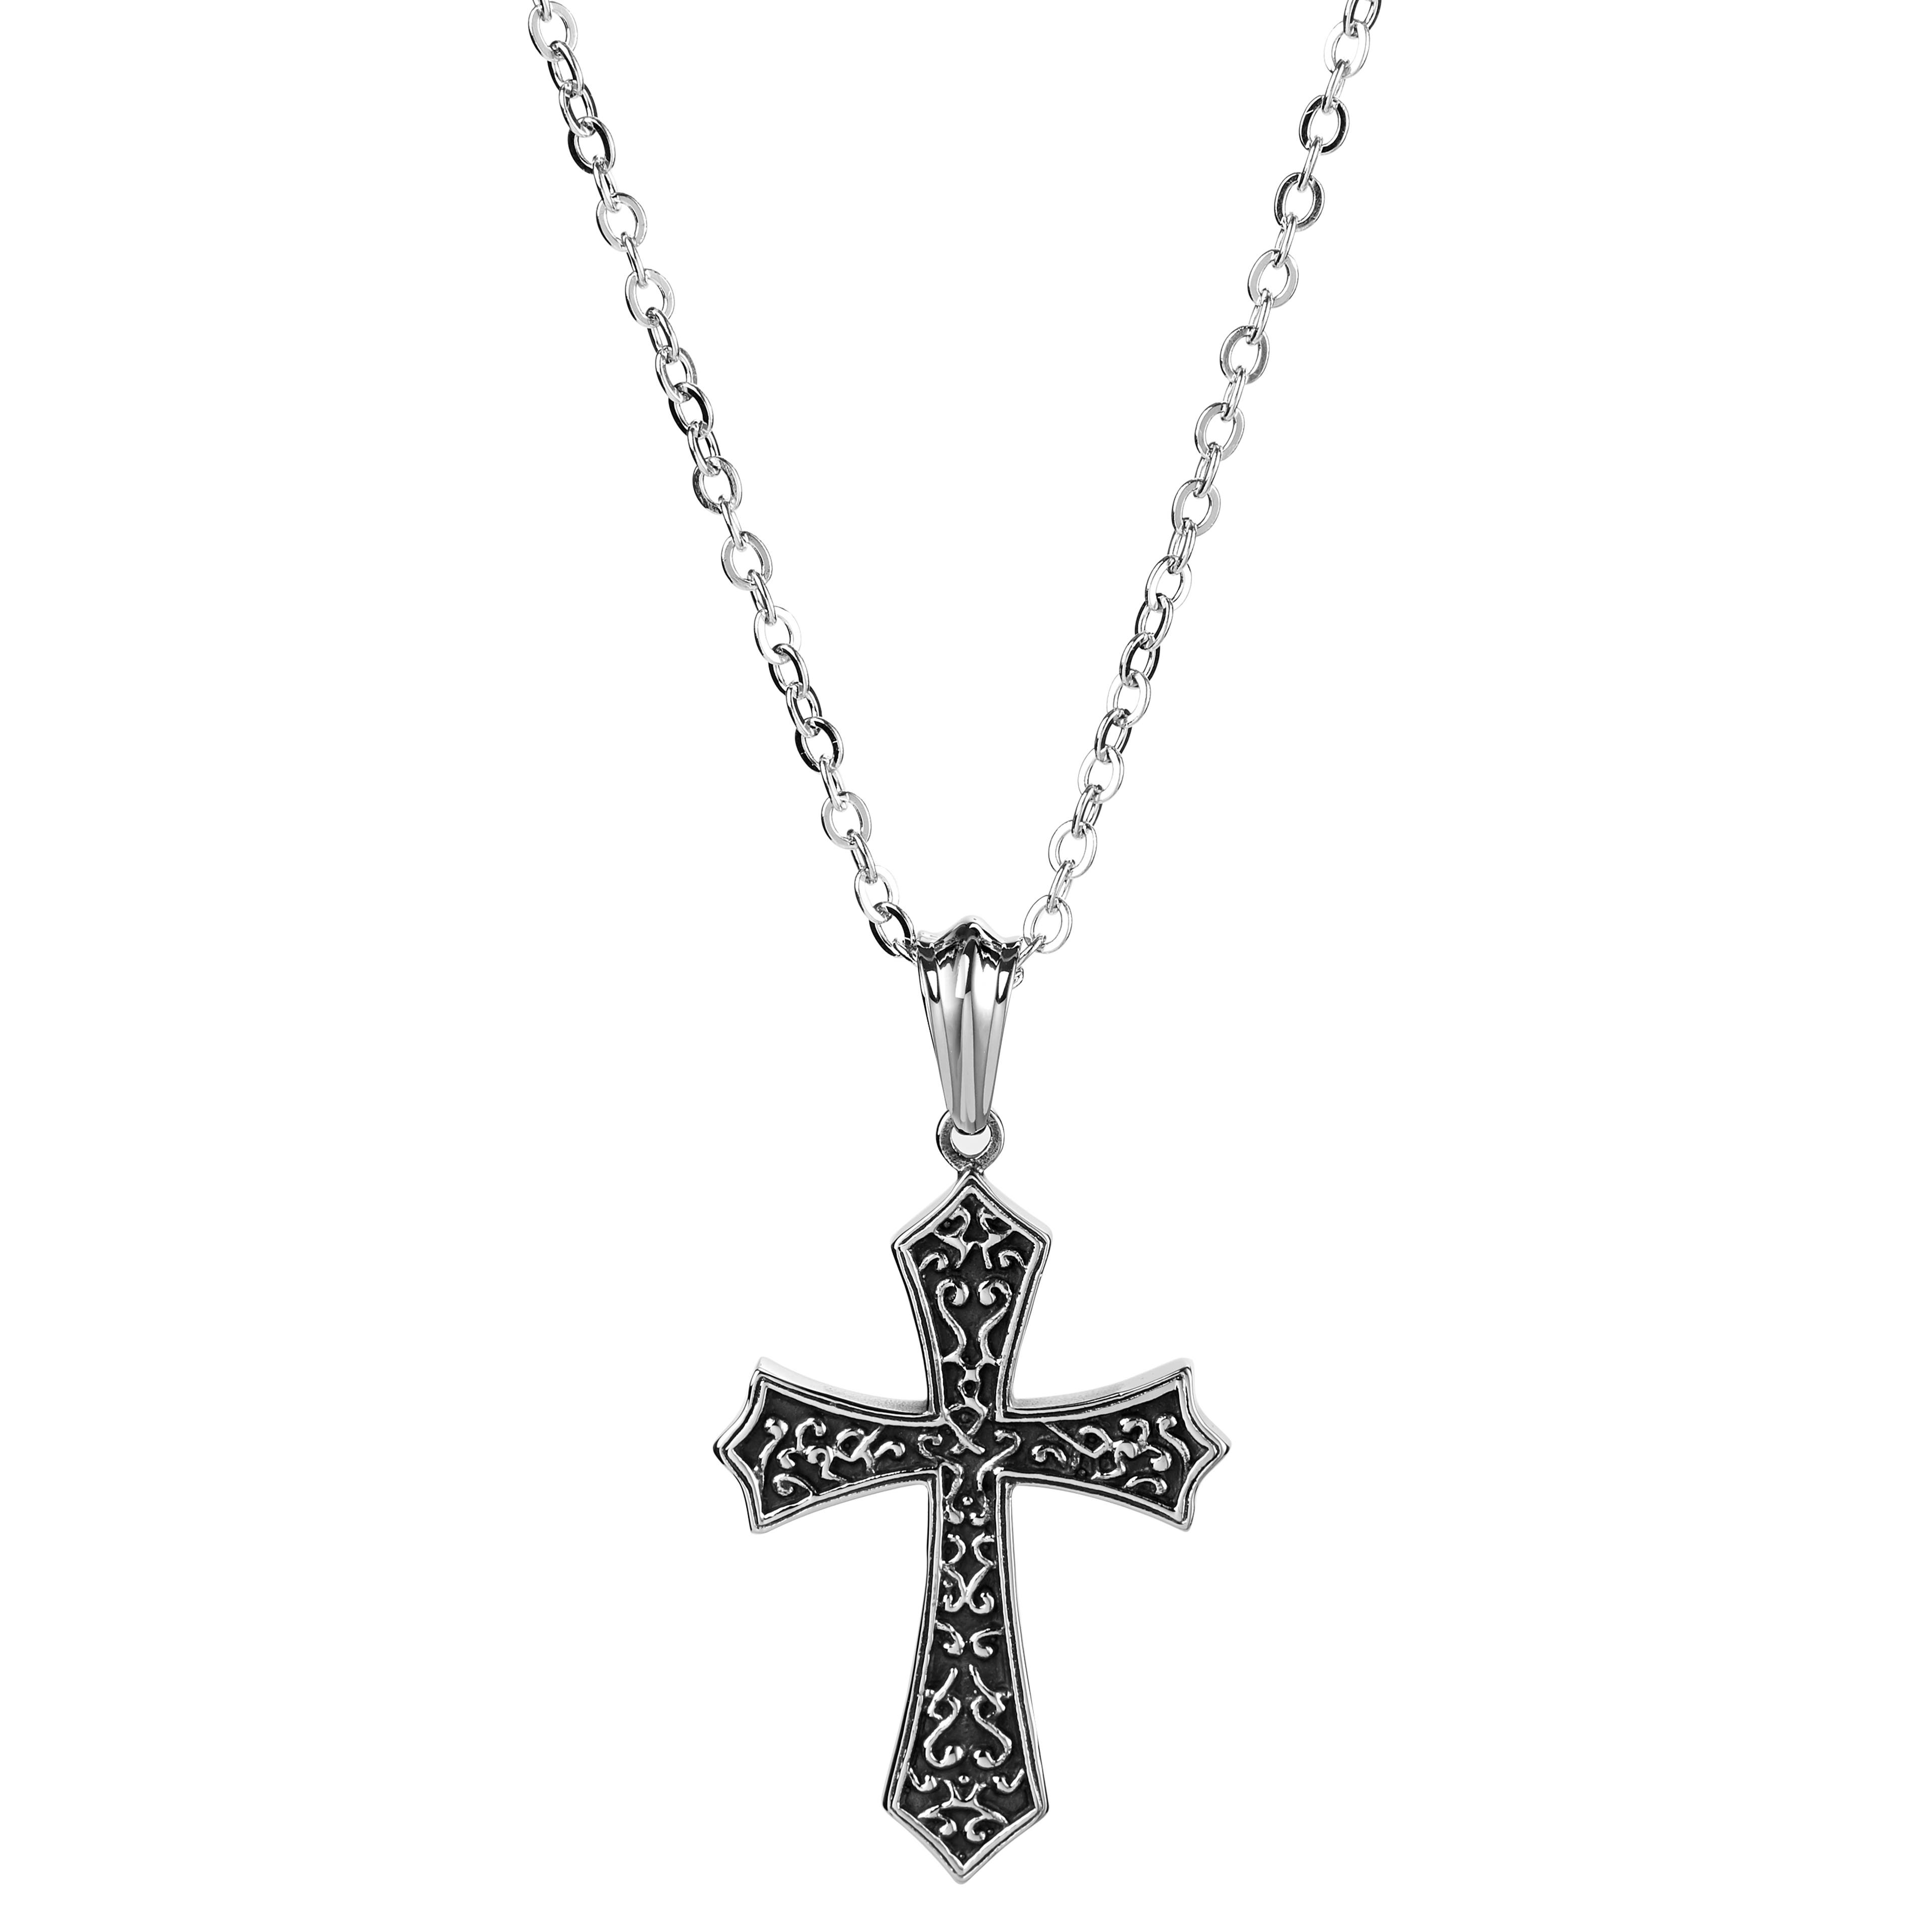 Reversible Stainless Steel Cross Necklace